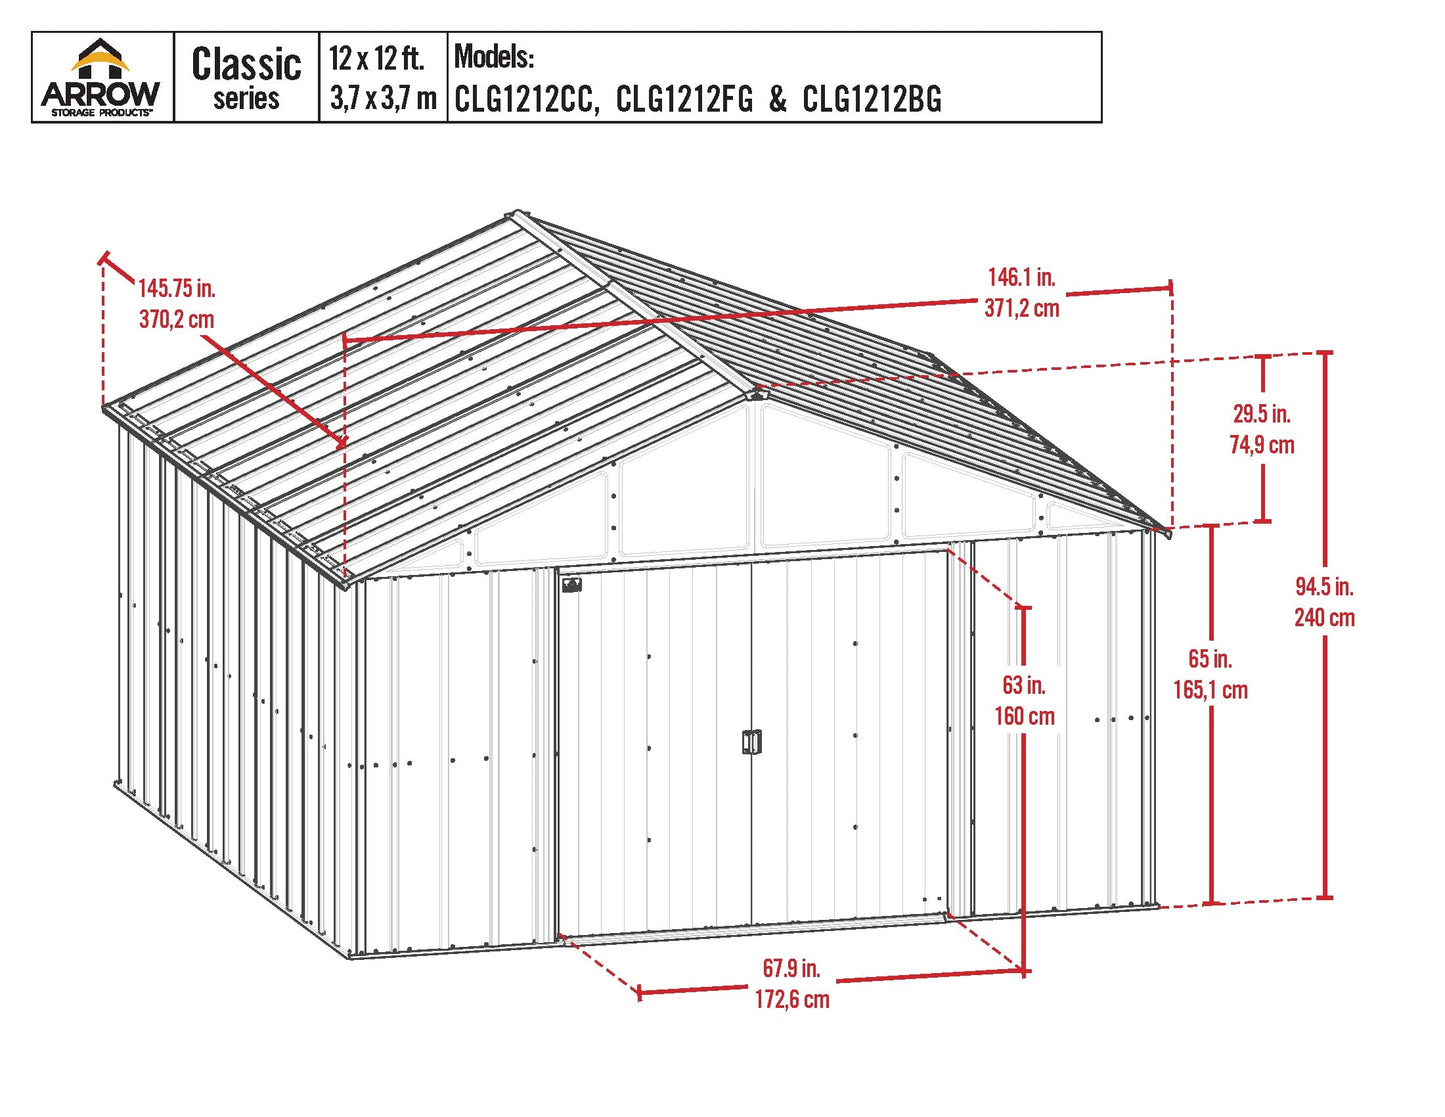 Arrow Sheds Classic 12' x 12' Outdoor Padlockable Steel Storage Shed Building, Charcoal